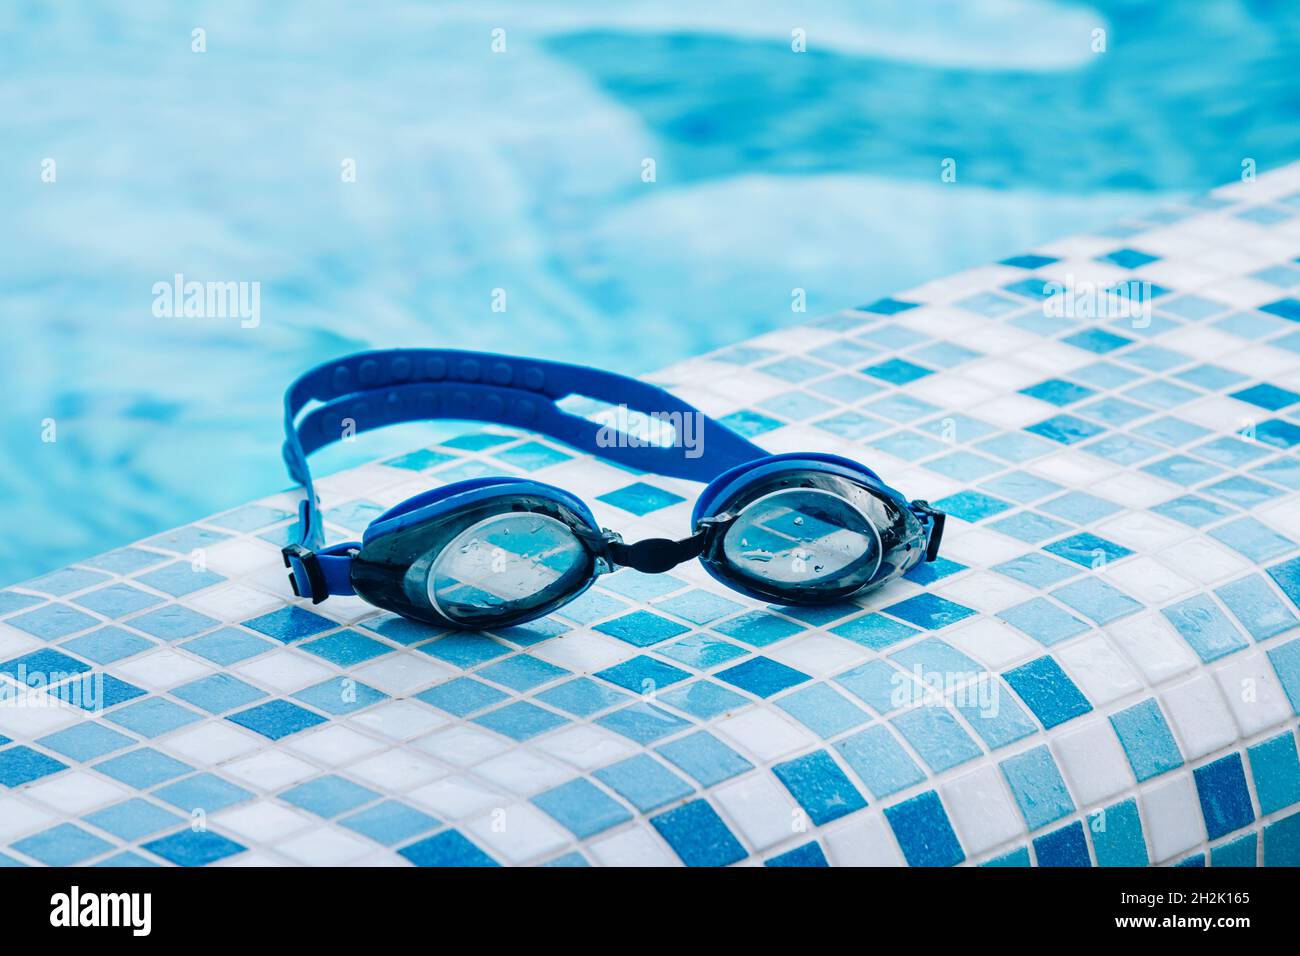 Blue professional swimming goggles with water drops on yellow lenses on a blue and white tiles of pool floor. Stock Photo